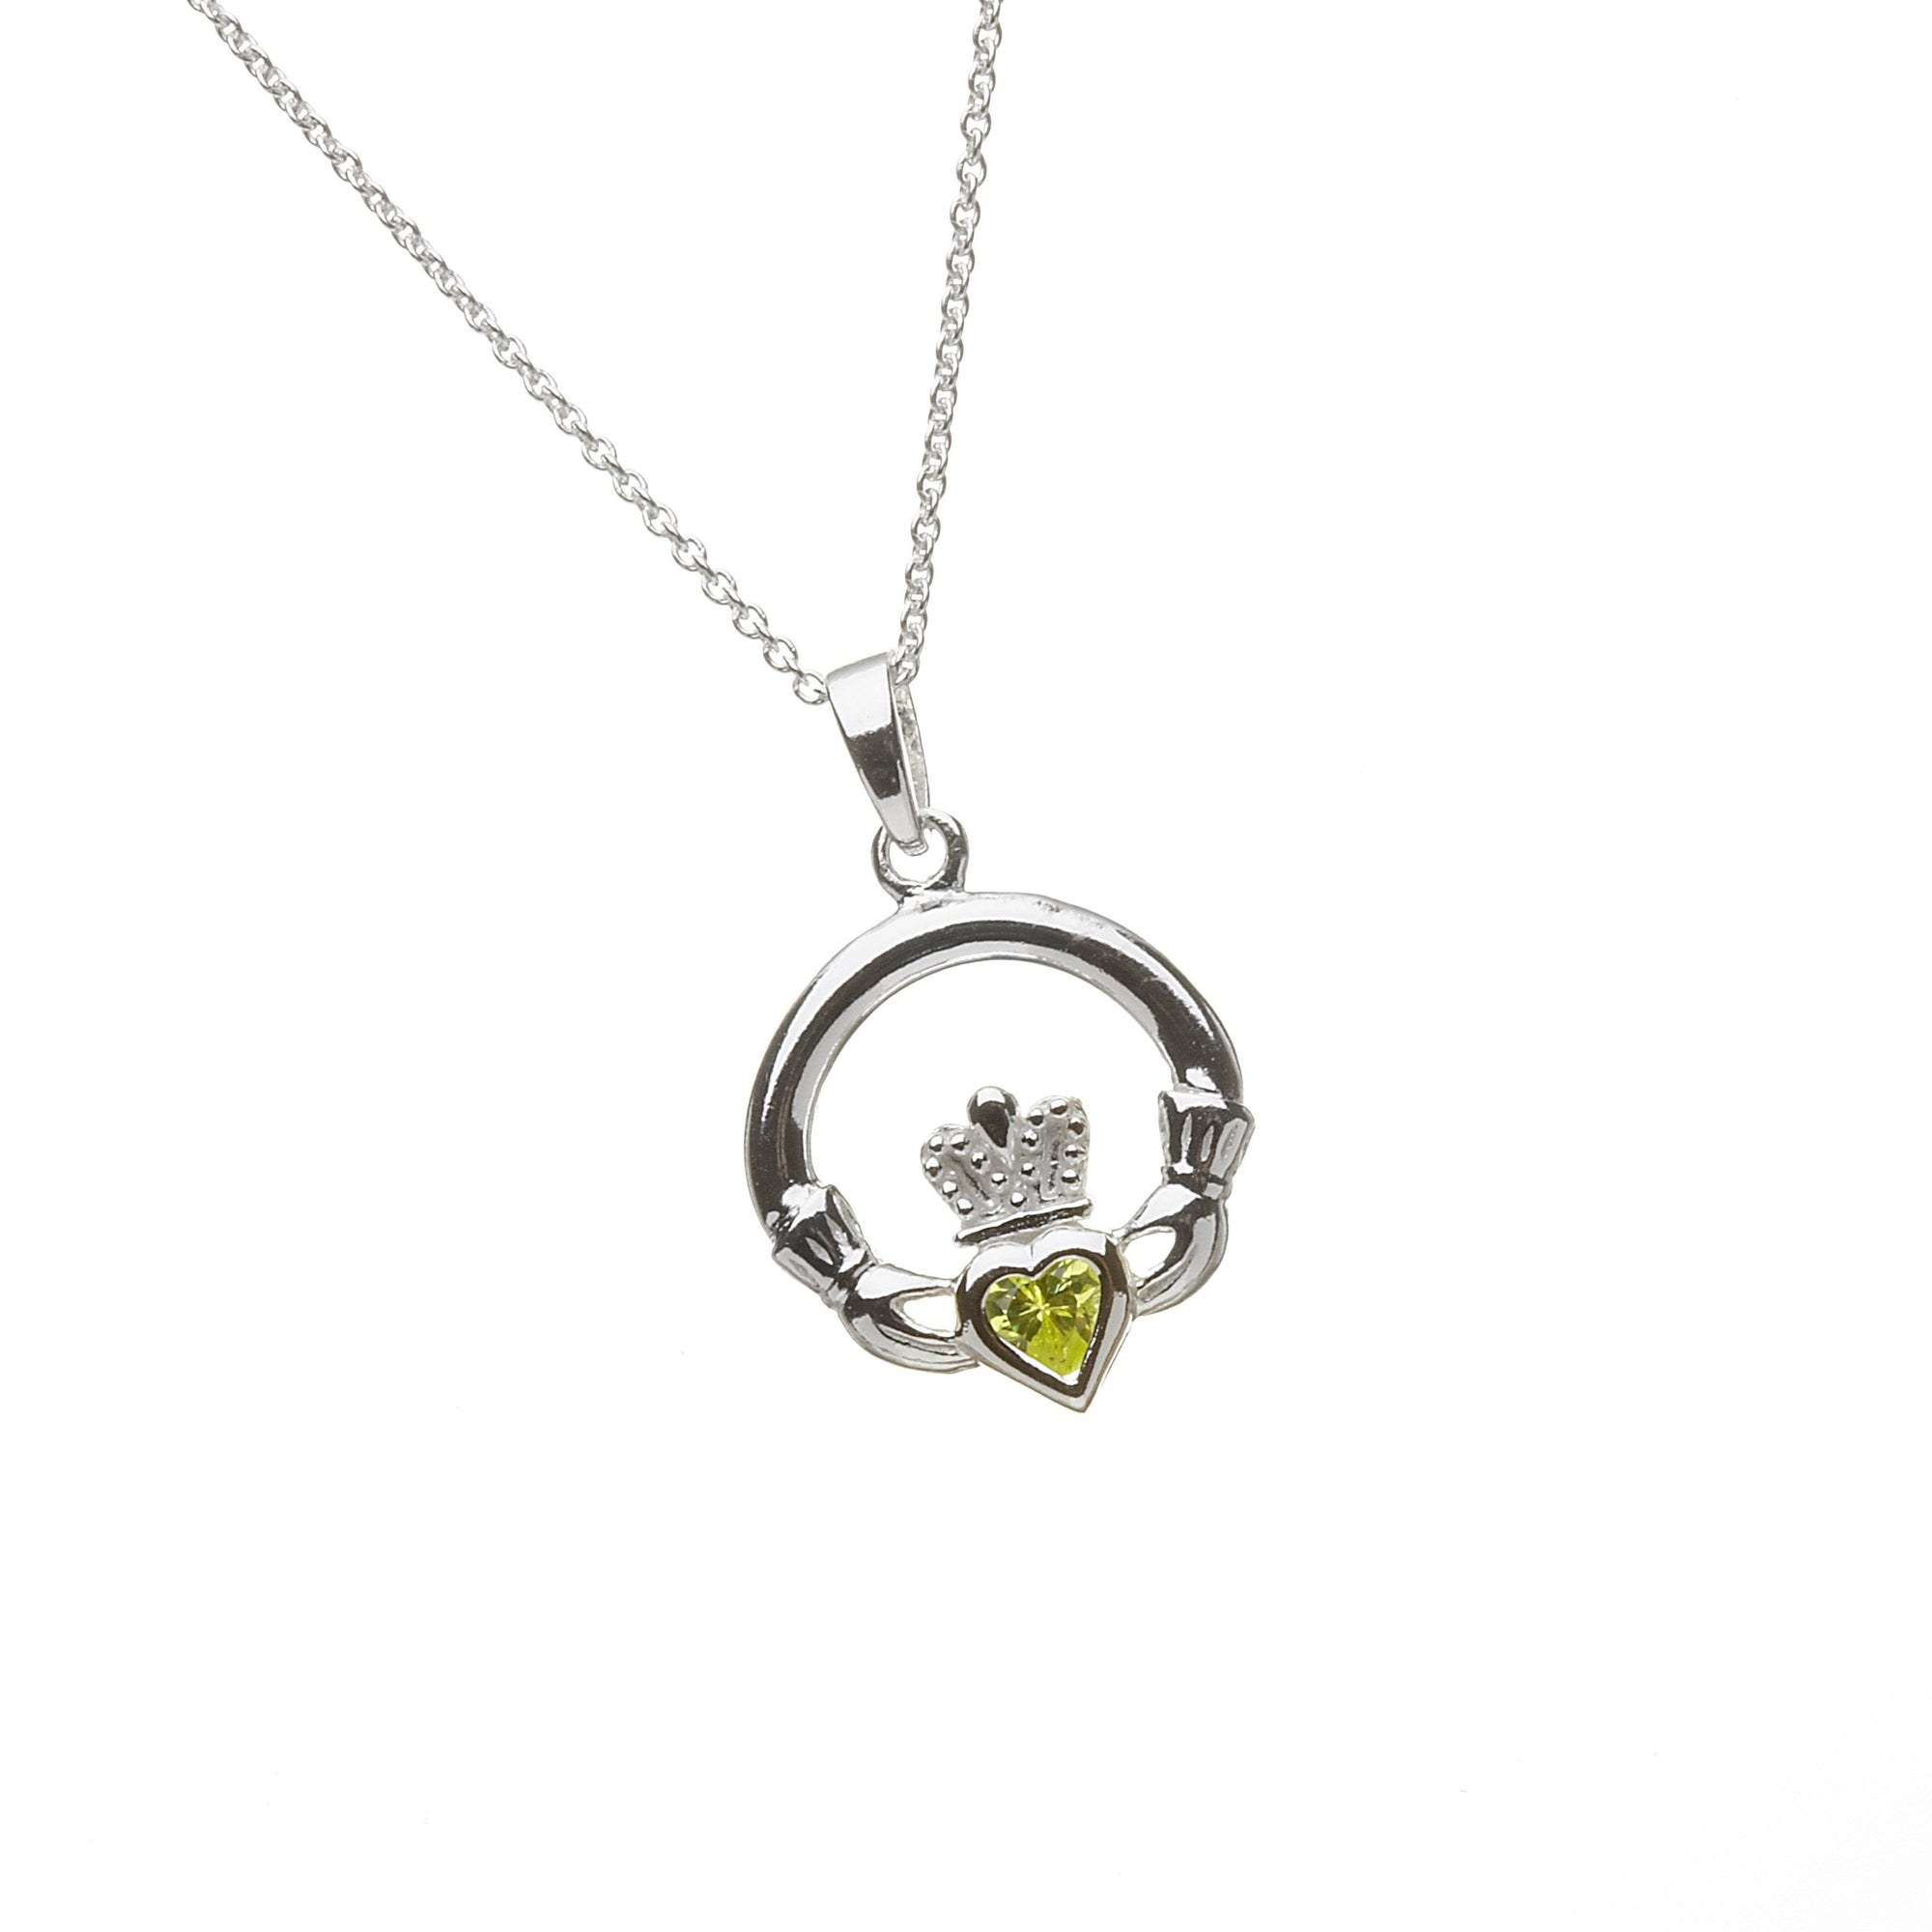 August Birthstone Claddagh Necklace Sterling Silver Claddagh Birthstone Necklace for August Aces Jewellers 